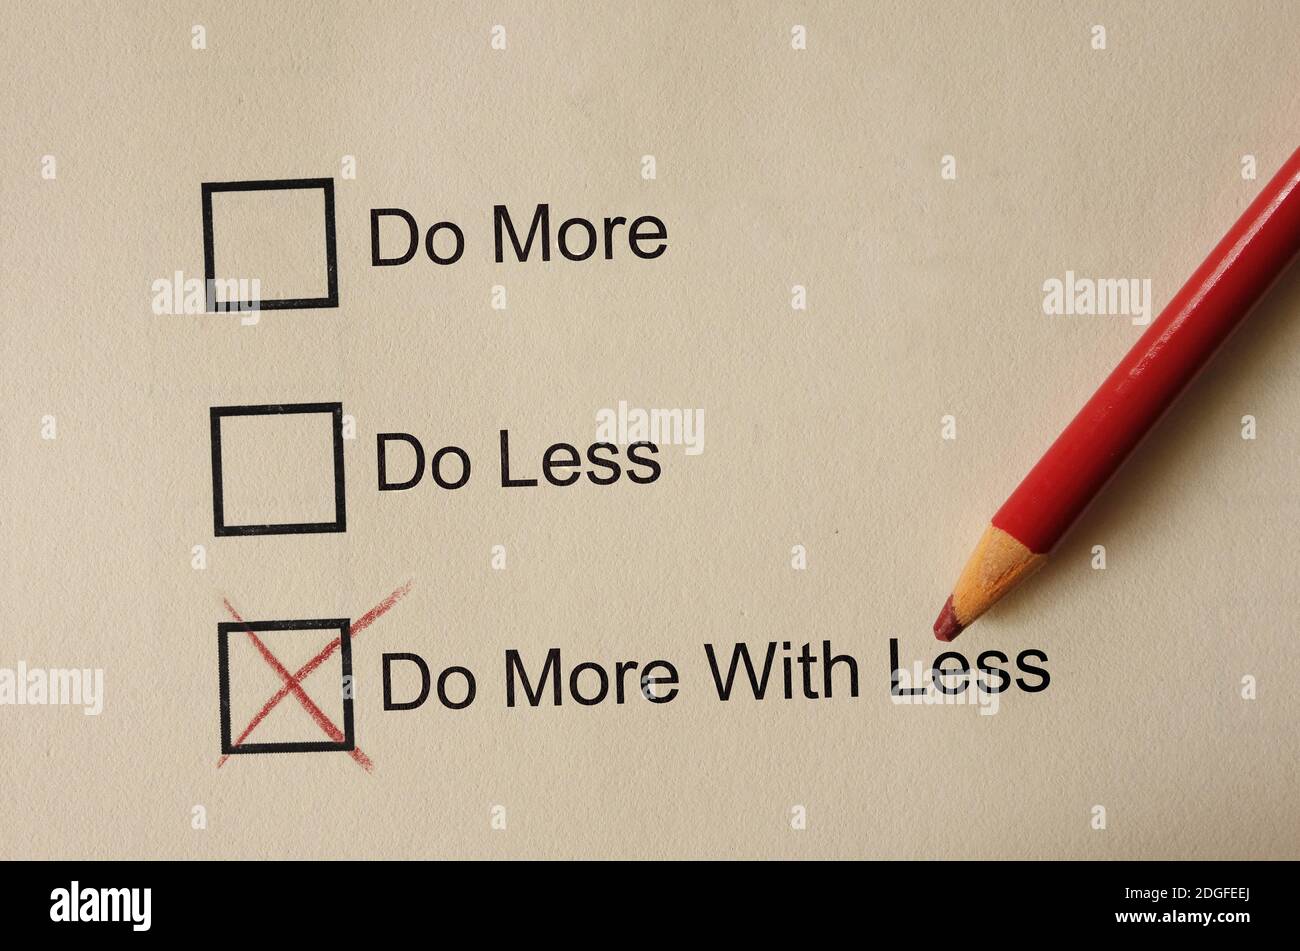 Do More With Less check boxes Stock Photo